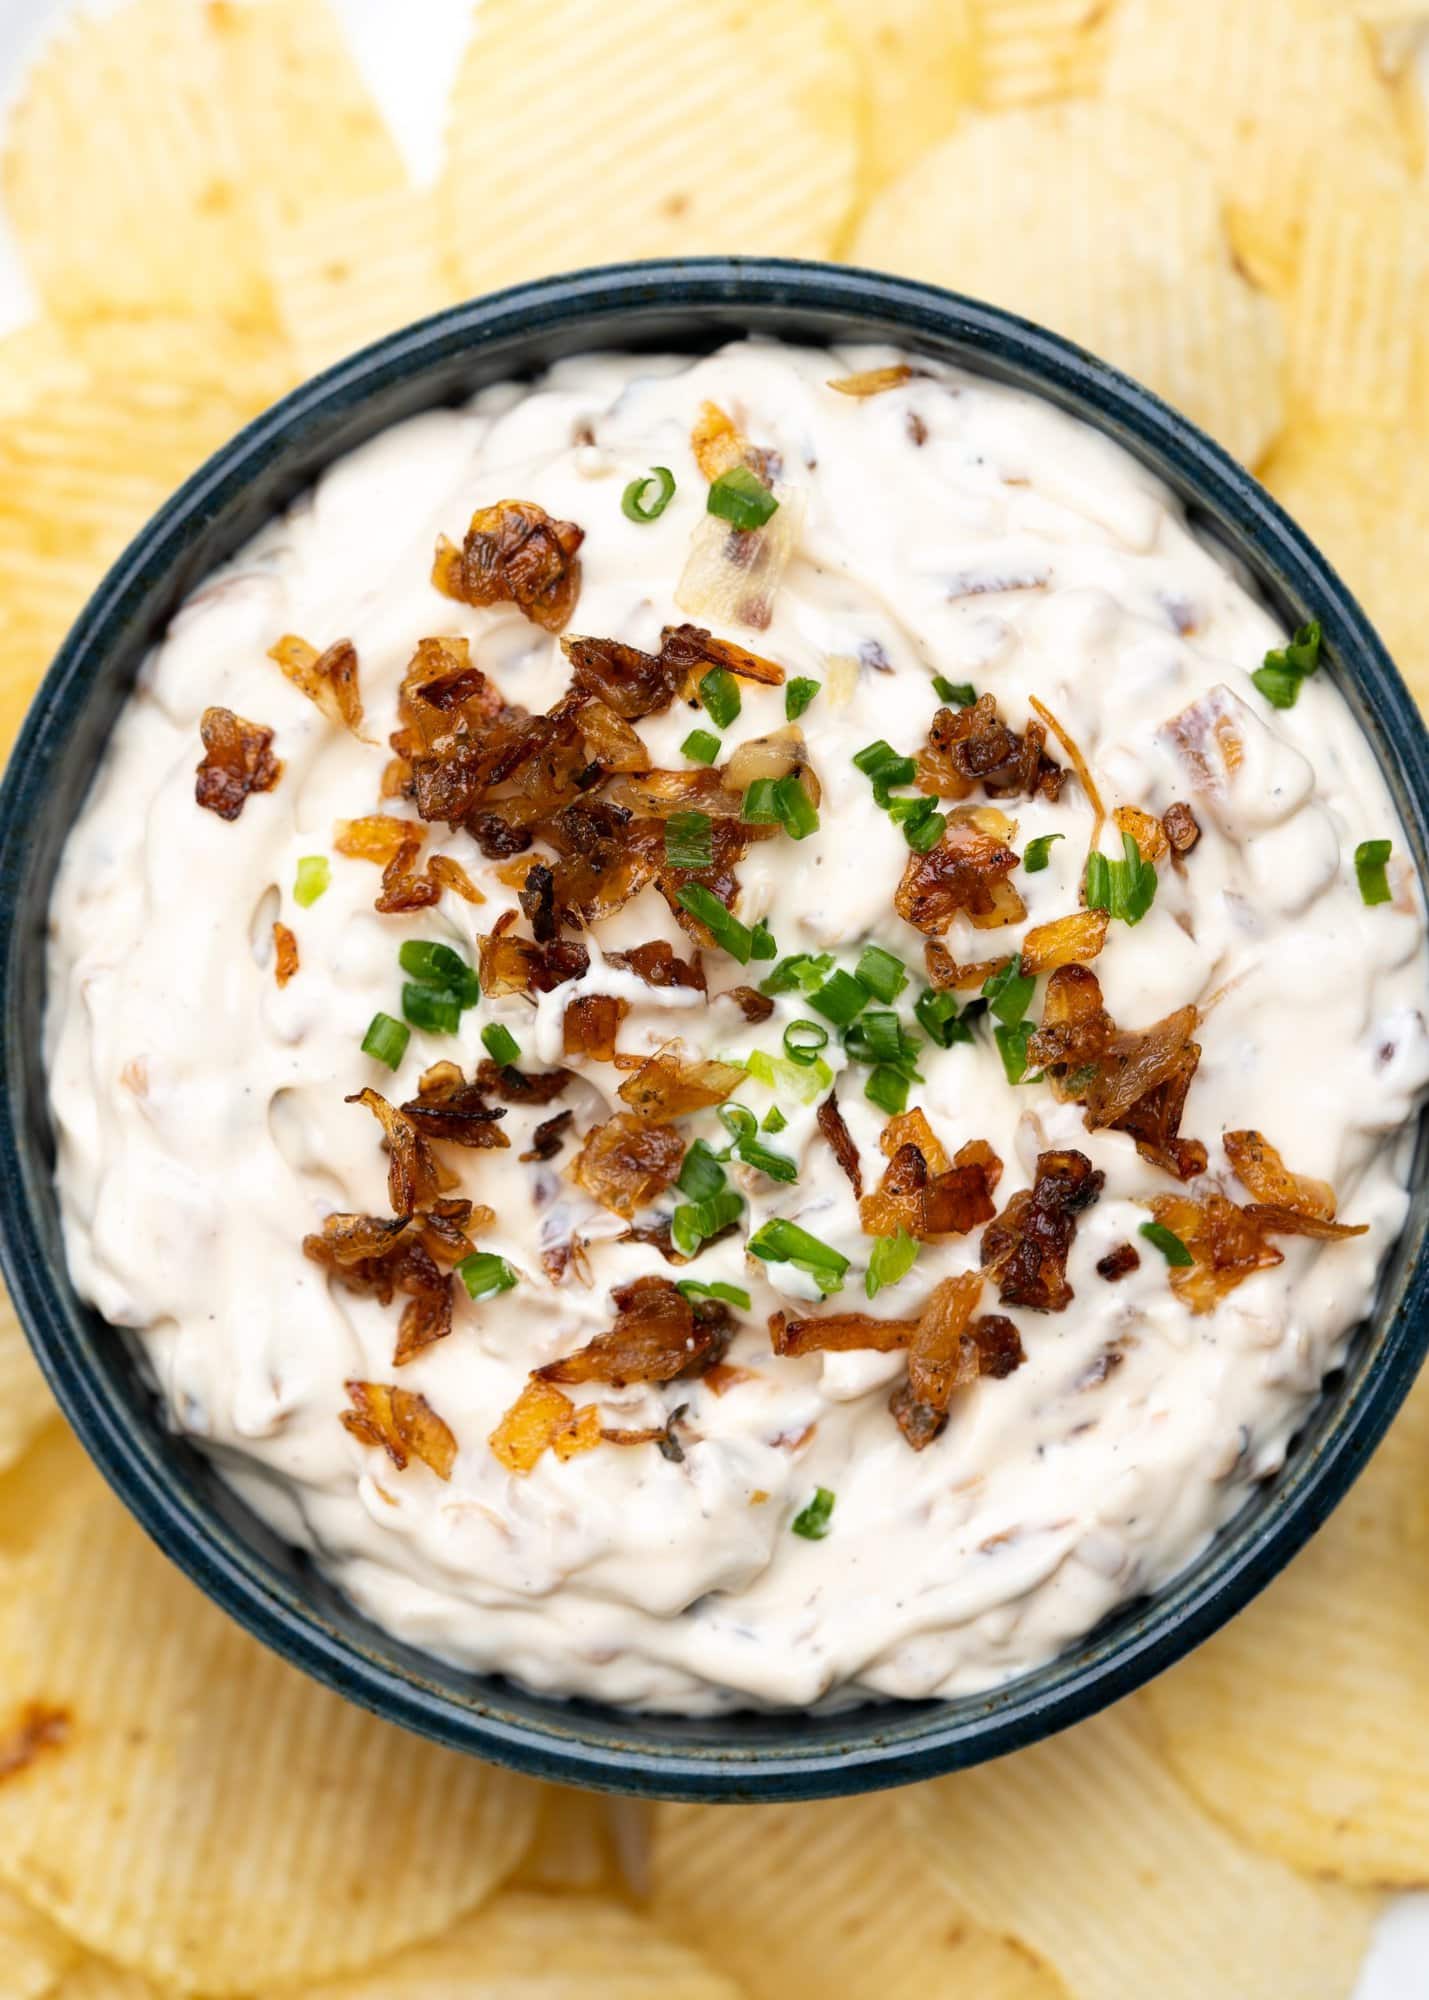 French onion dip garnished with chives and caramelized onion. Served with potato chips. 